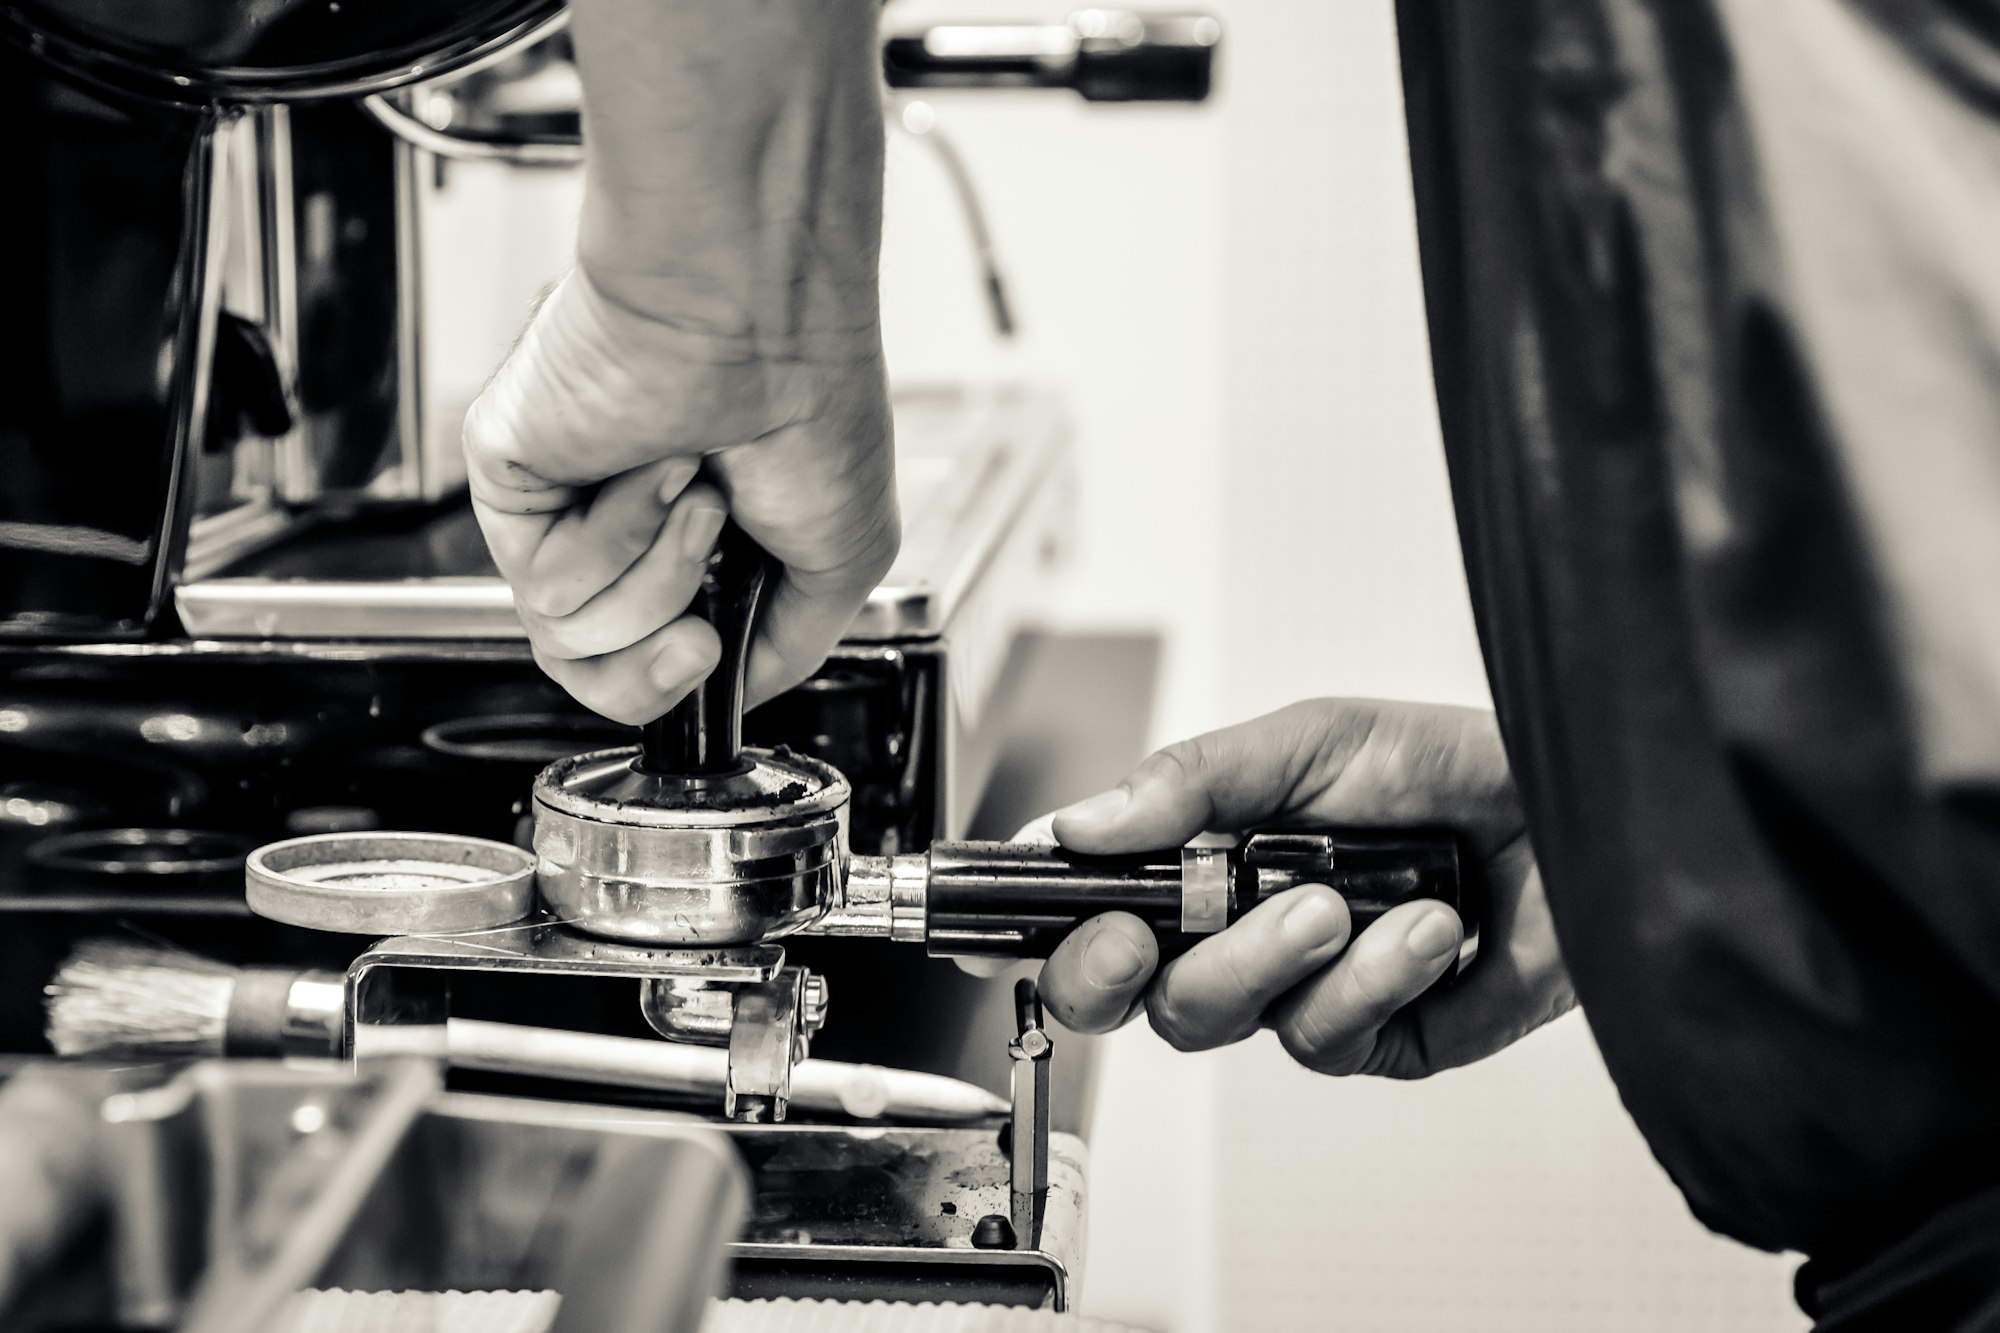 A barista is tamping his coffee at a coffee bar and there is a blurred espresso machine in the background.